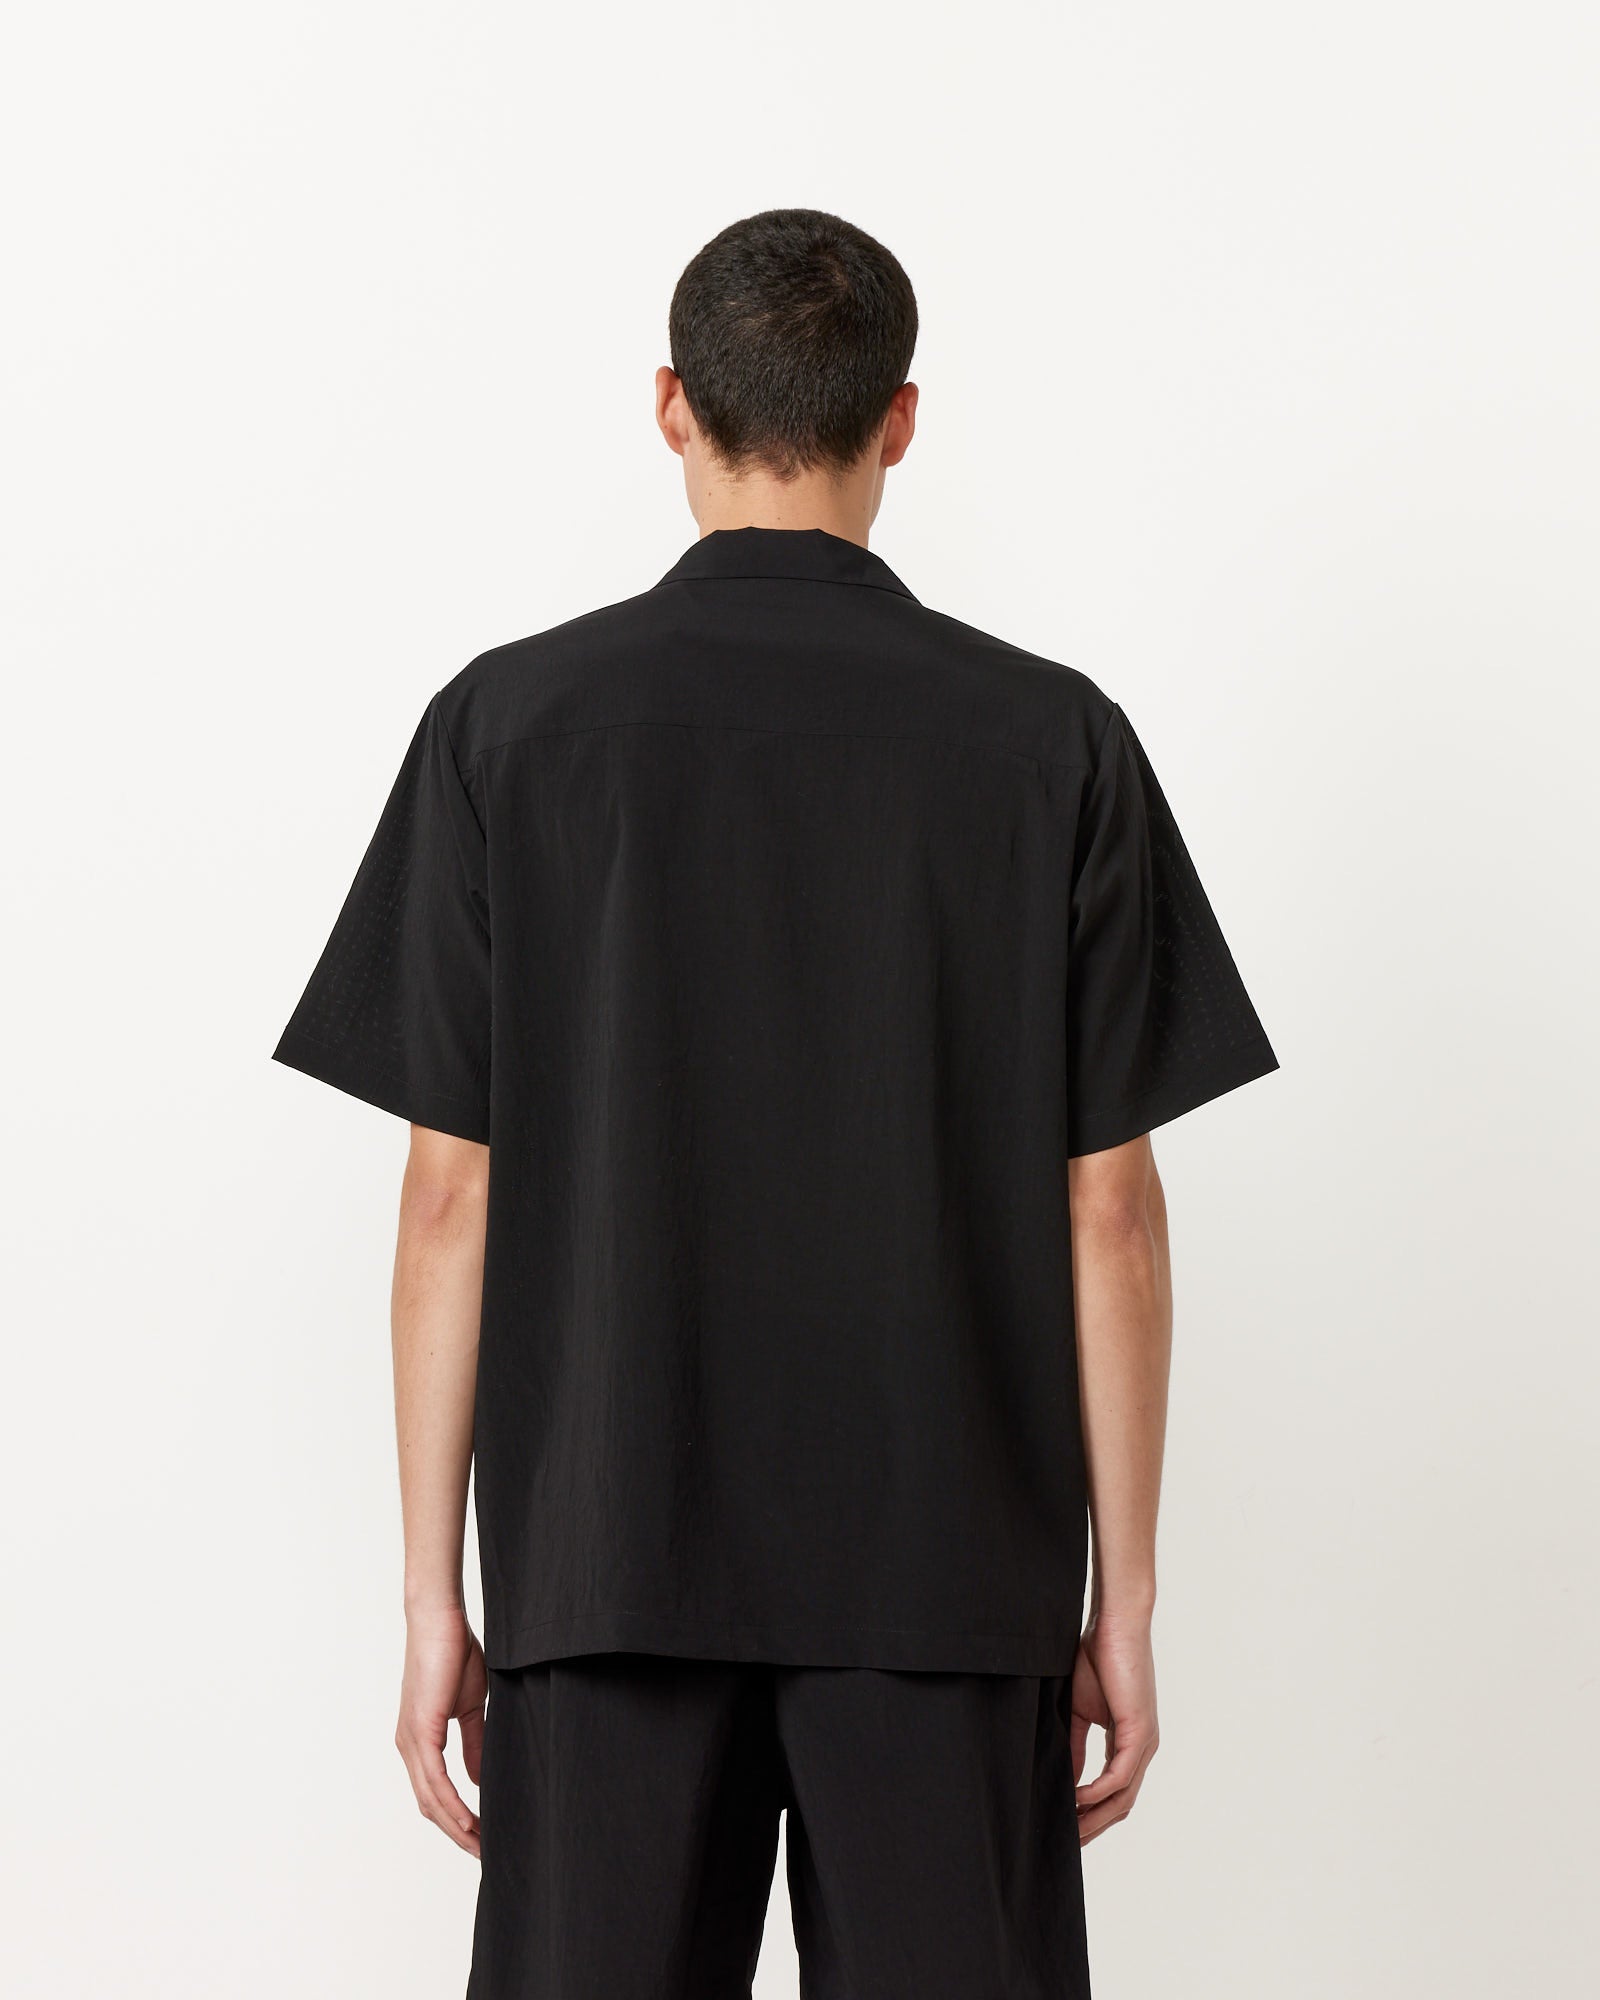 Breathable Quick Dry Shirt in Black